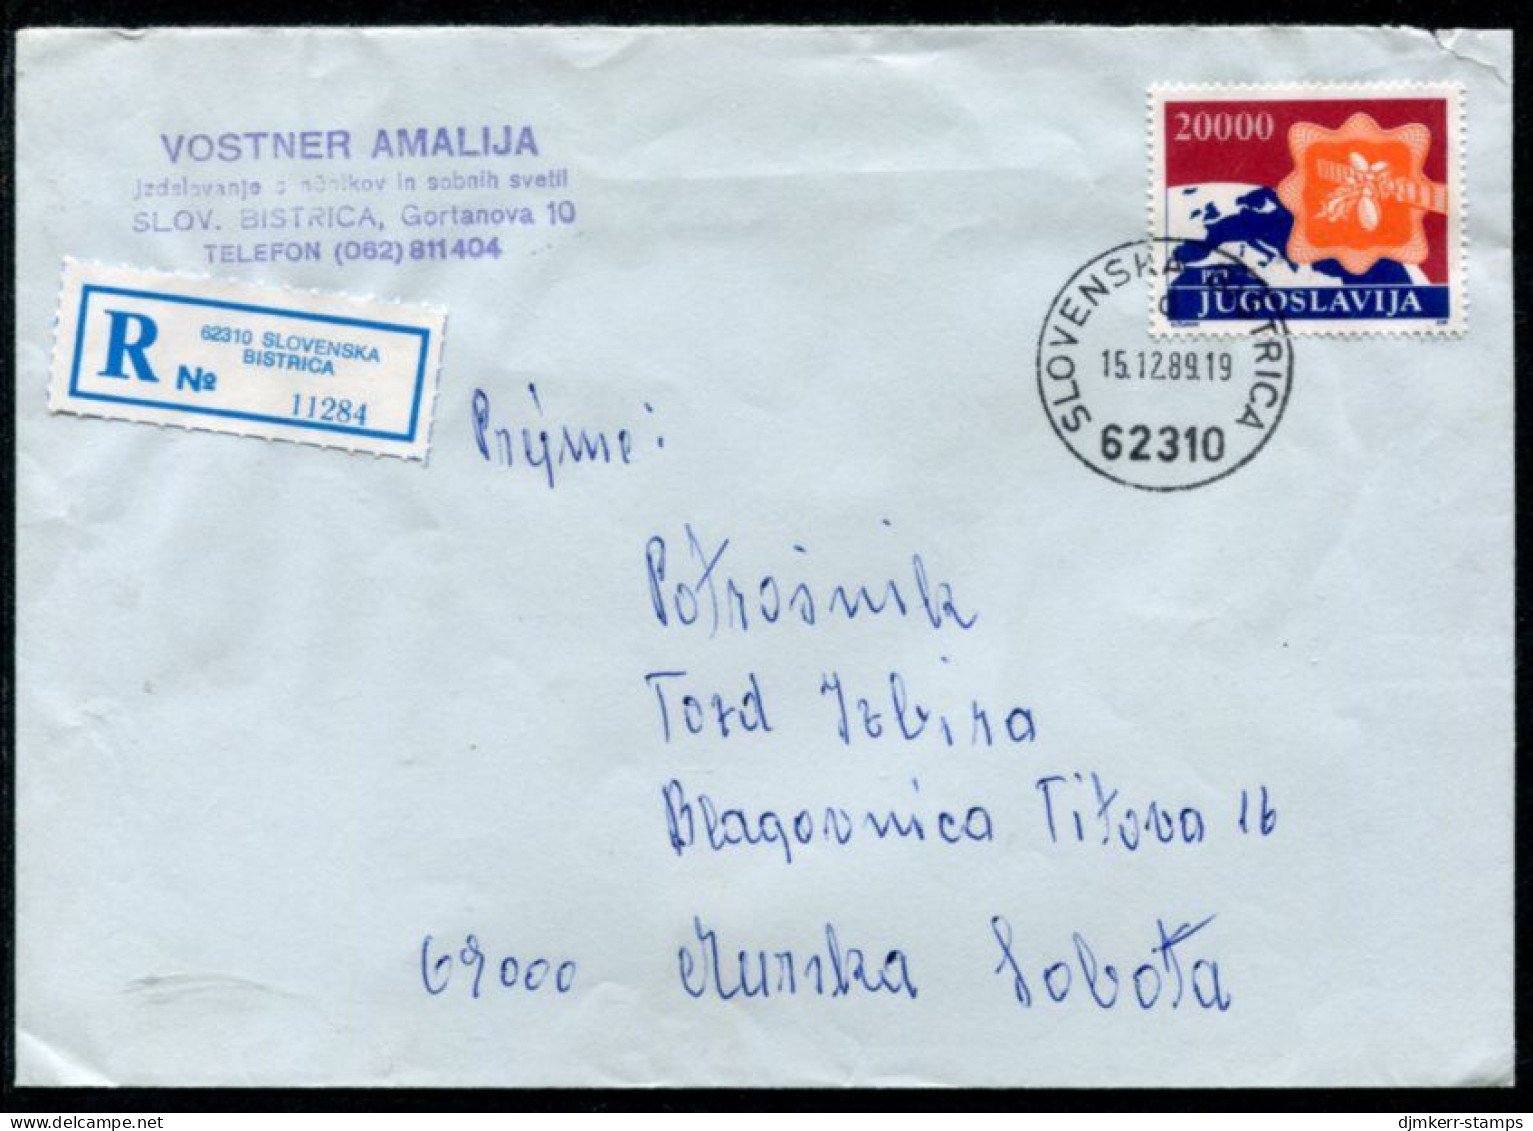 YUGOSLAVIA 1989 Registered Cover Franked With Postal Services 20000 D Single Franking    Michel 2362 - Storia Postale